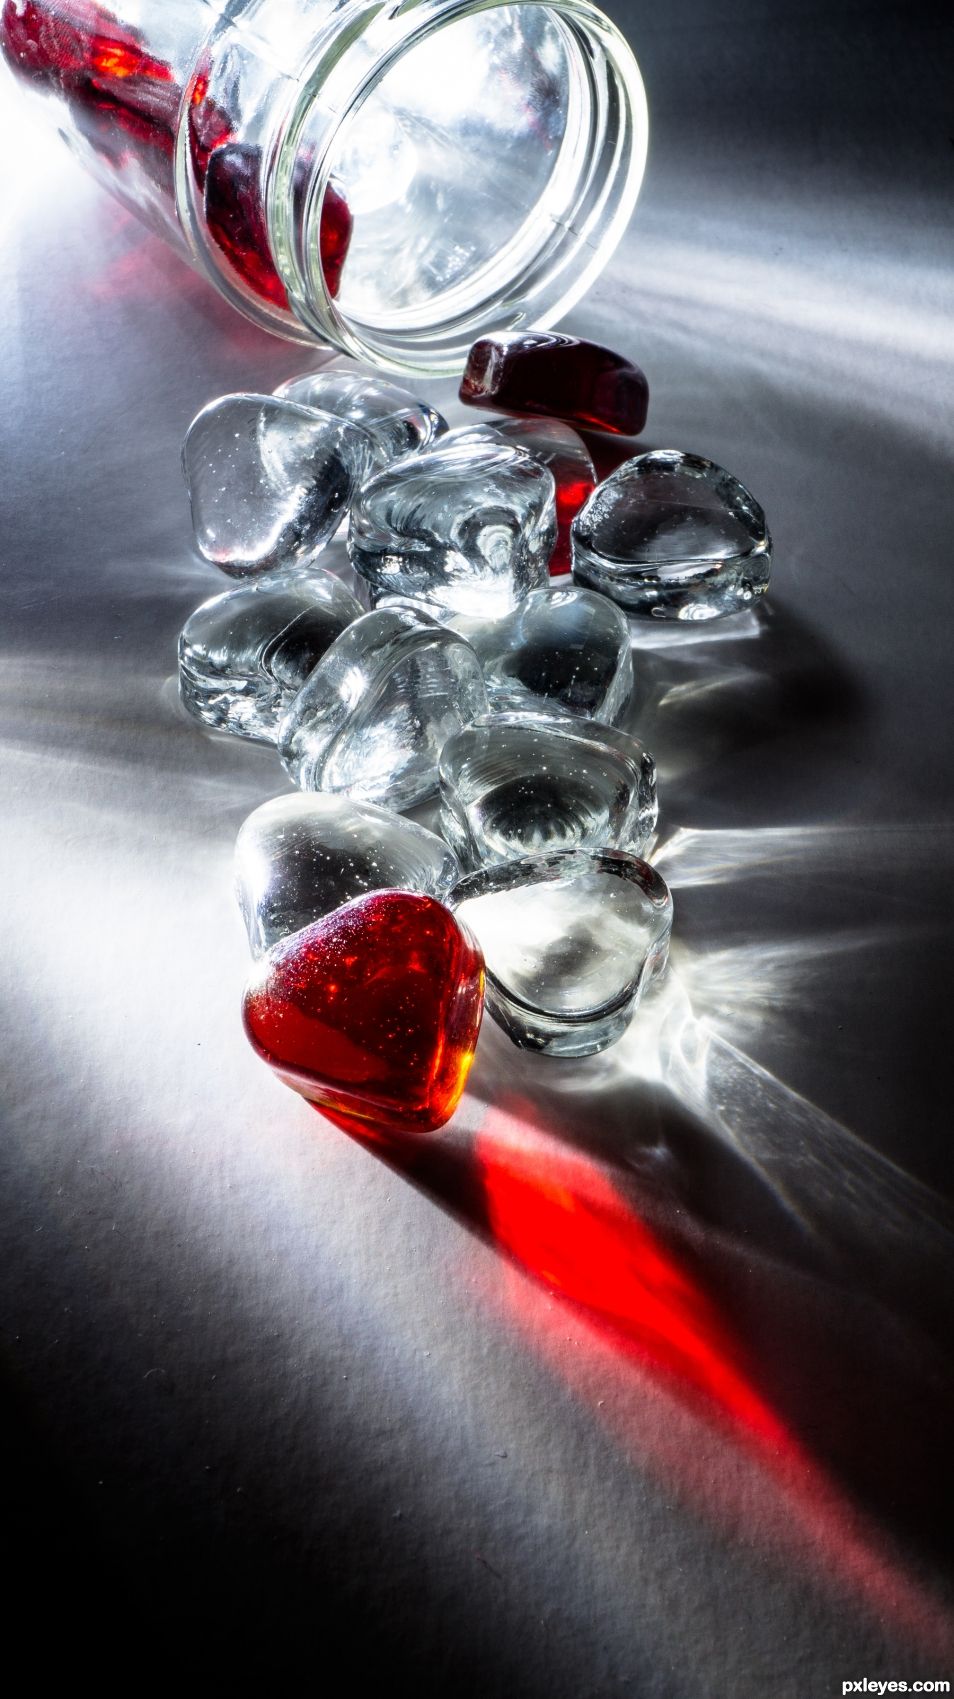 Creation of glass heart : Final Result